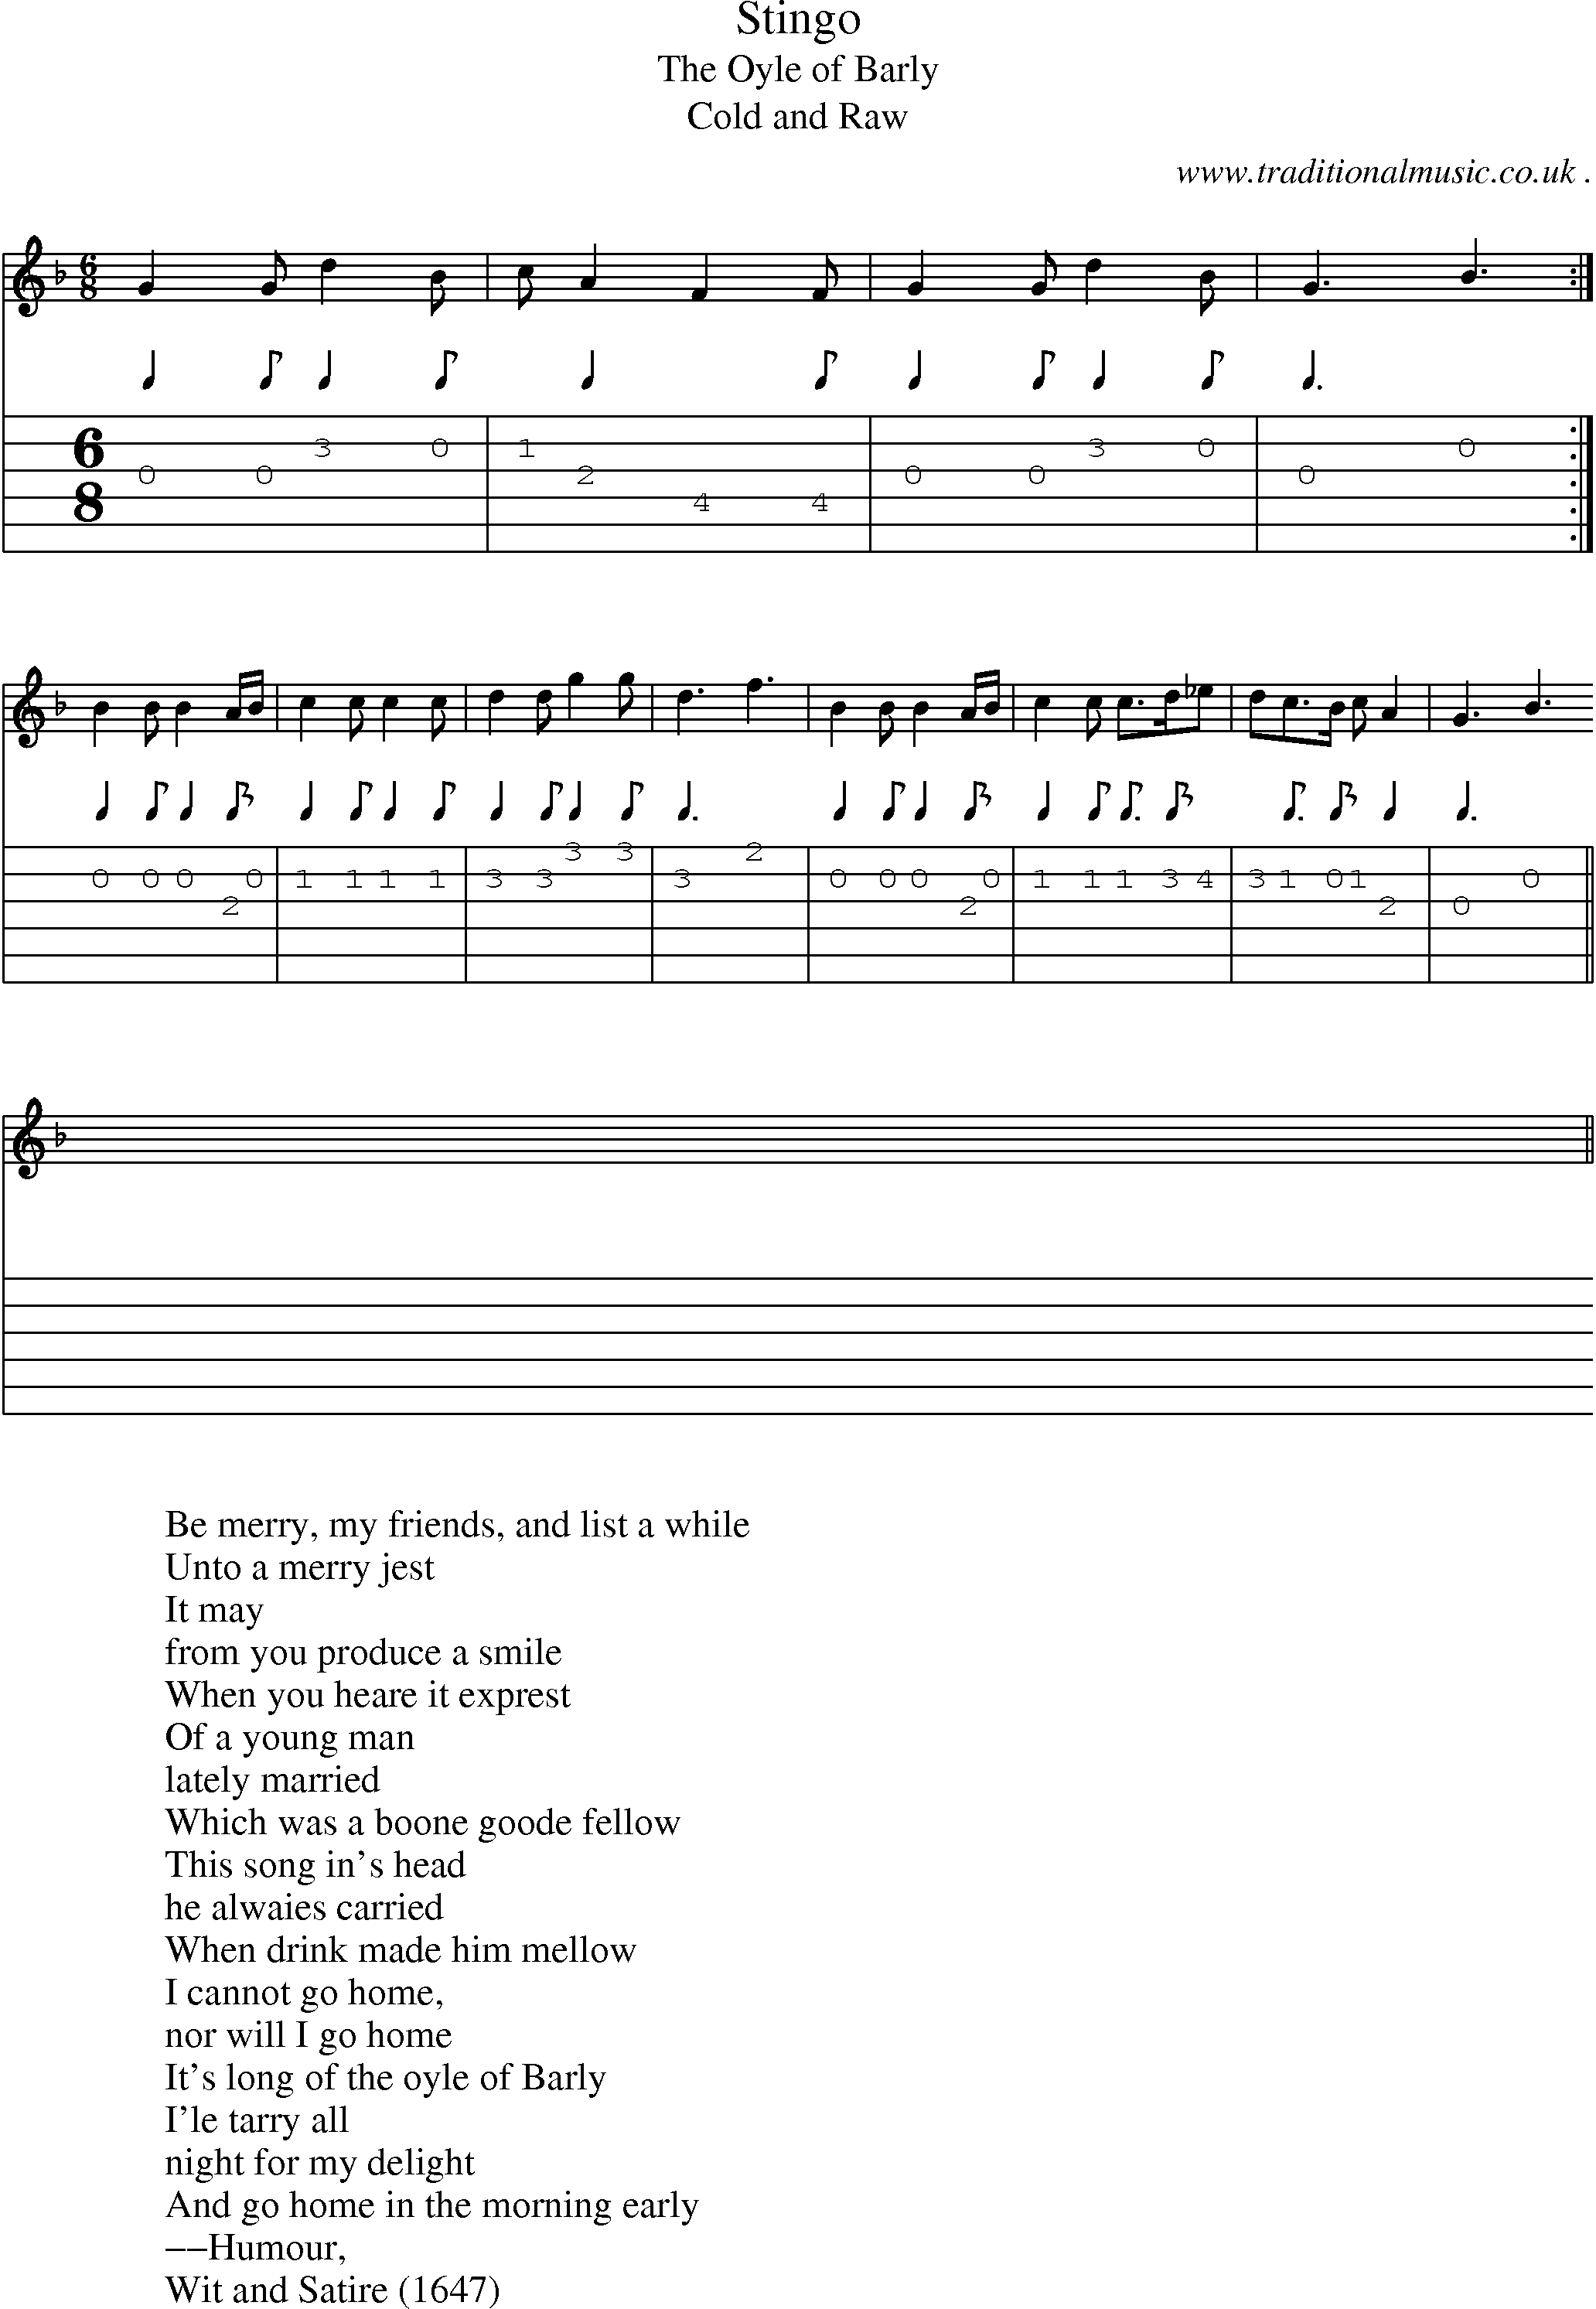 Sheet-Music and Guitar Tabs for Stingo